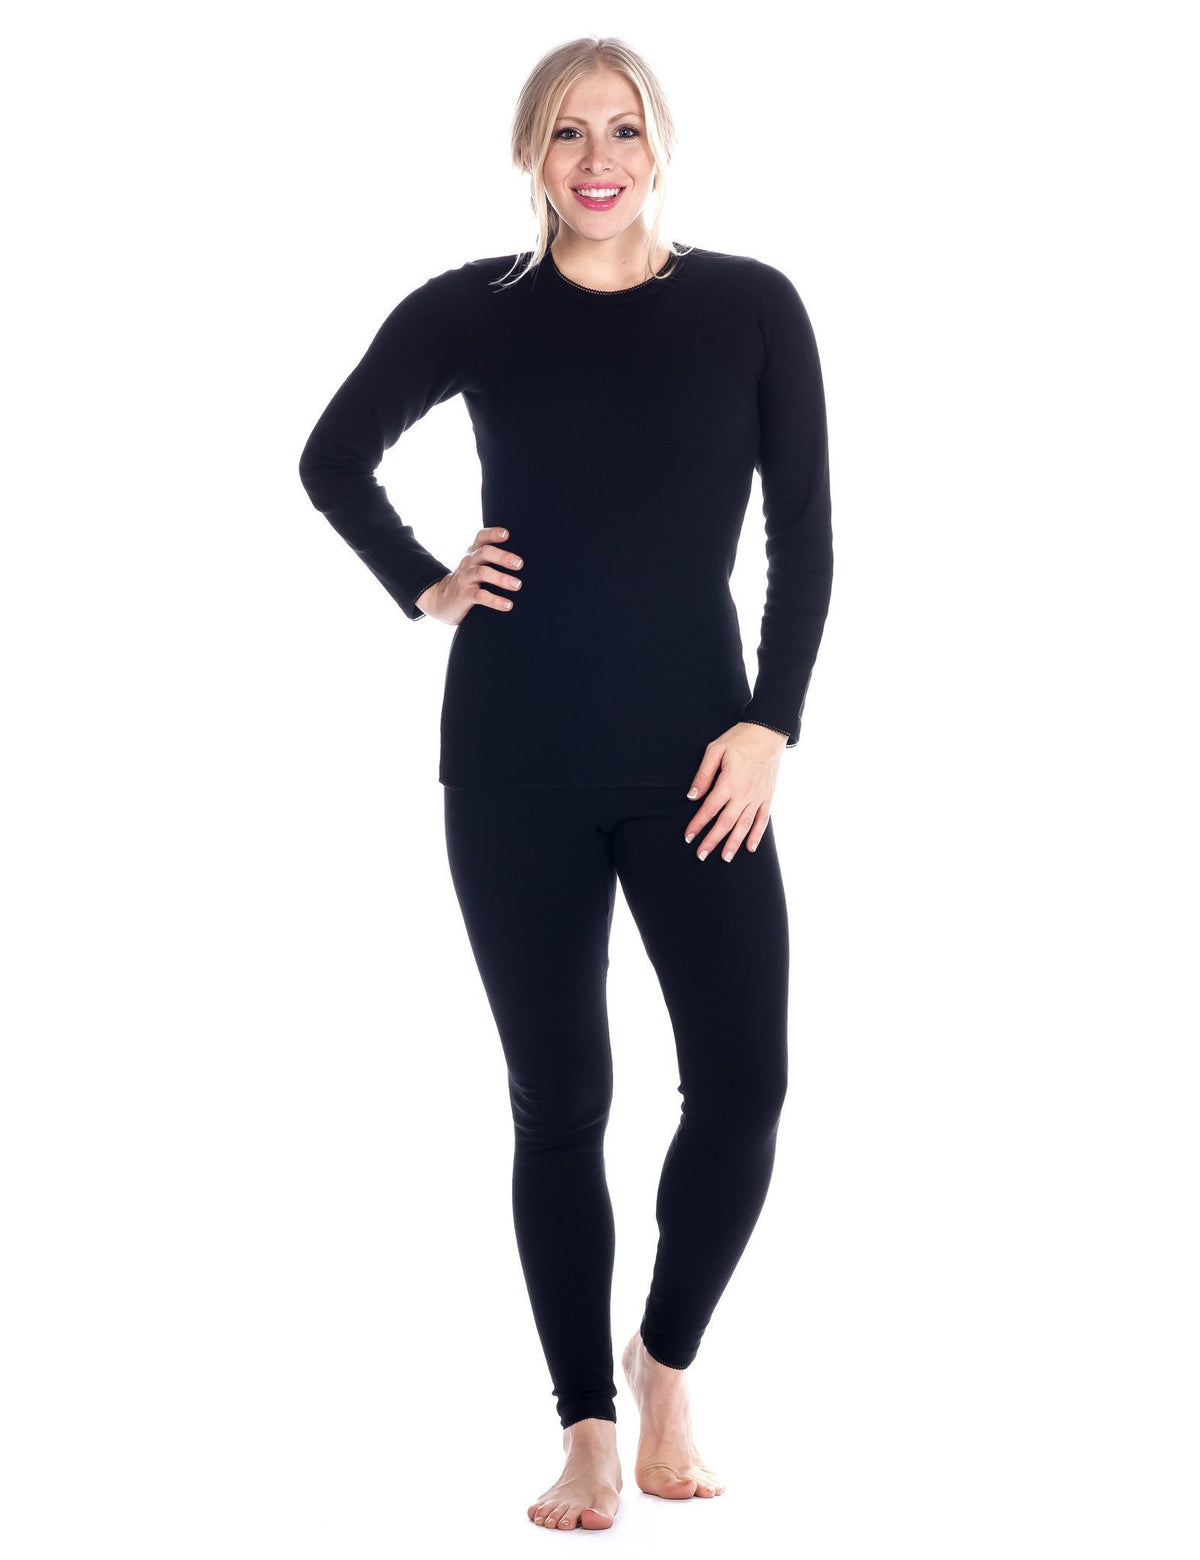 Women's Extreme Cold Waffle Knit Thermal Top and Bottom Set - Black